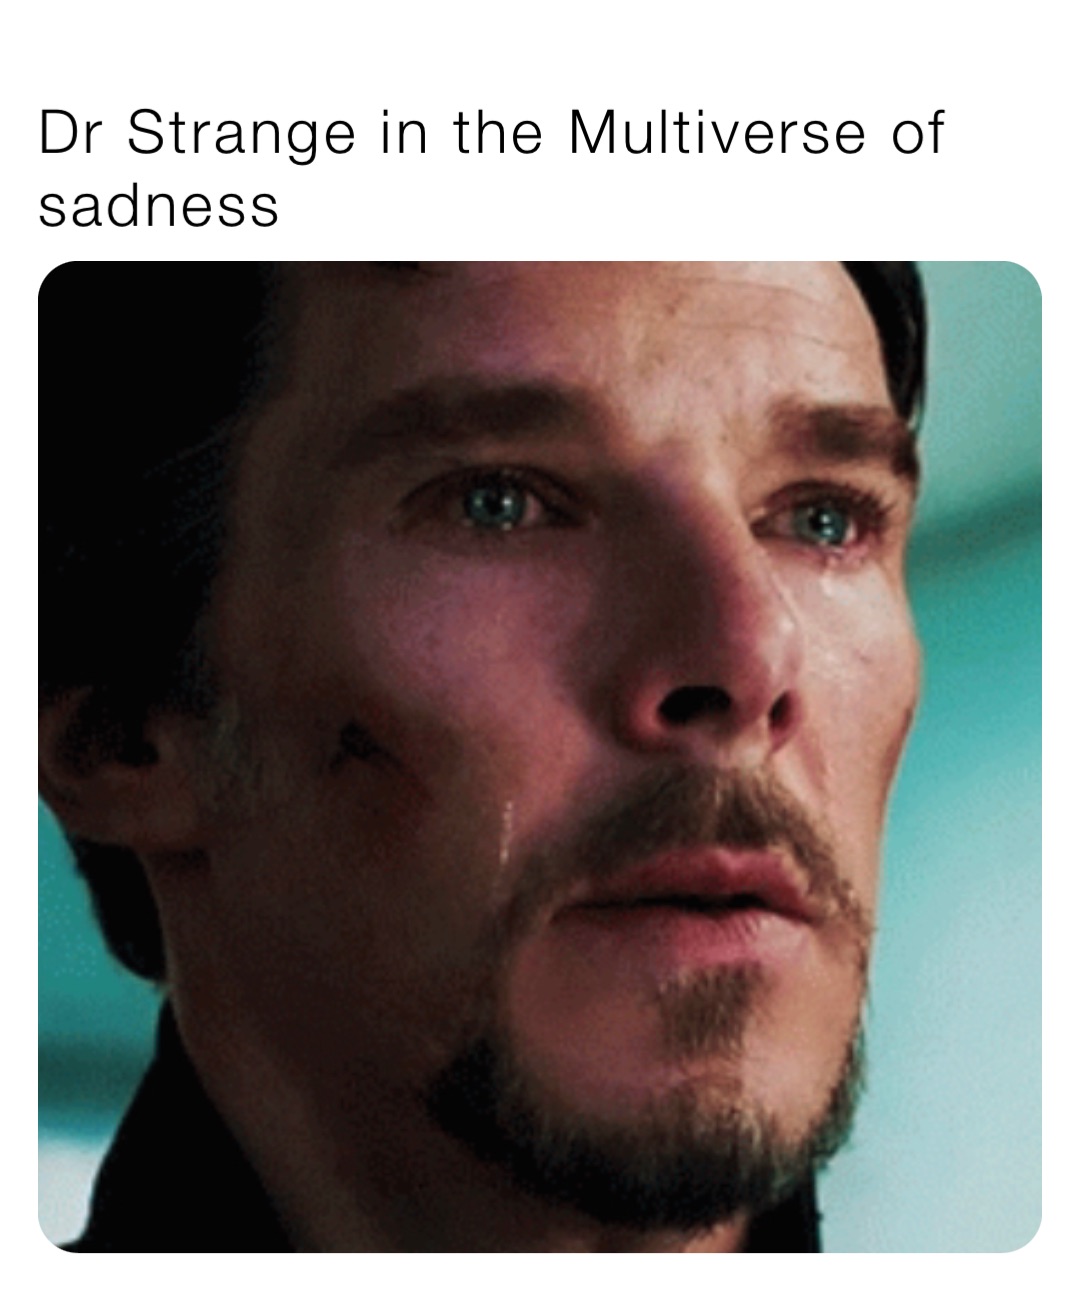 Dr Strange in the Multiverse of sadness